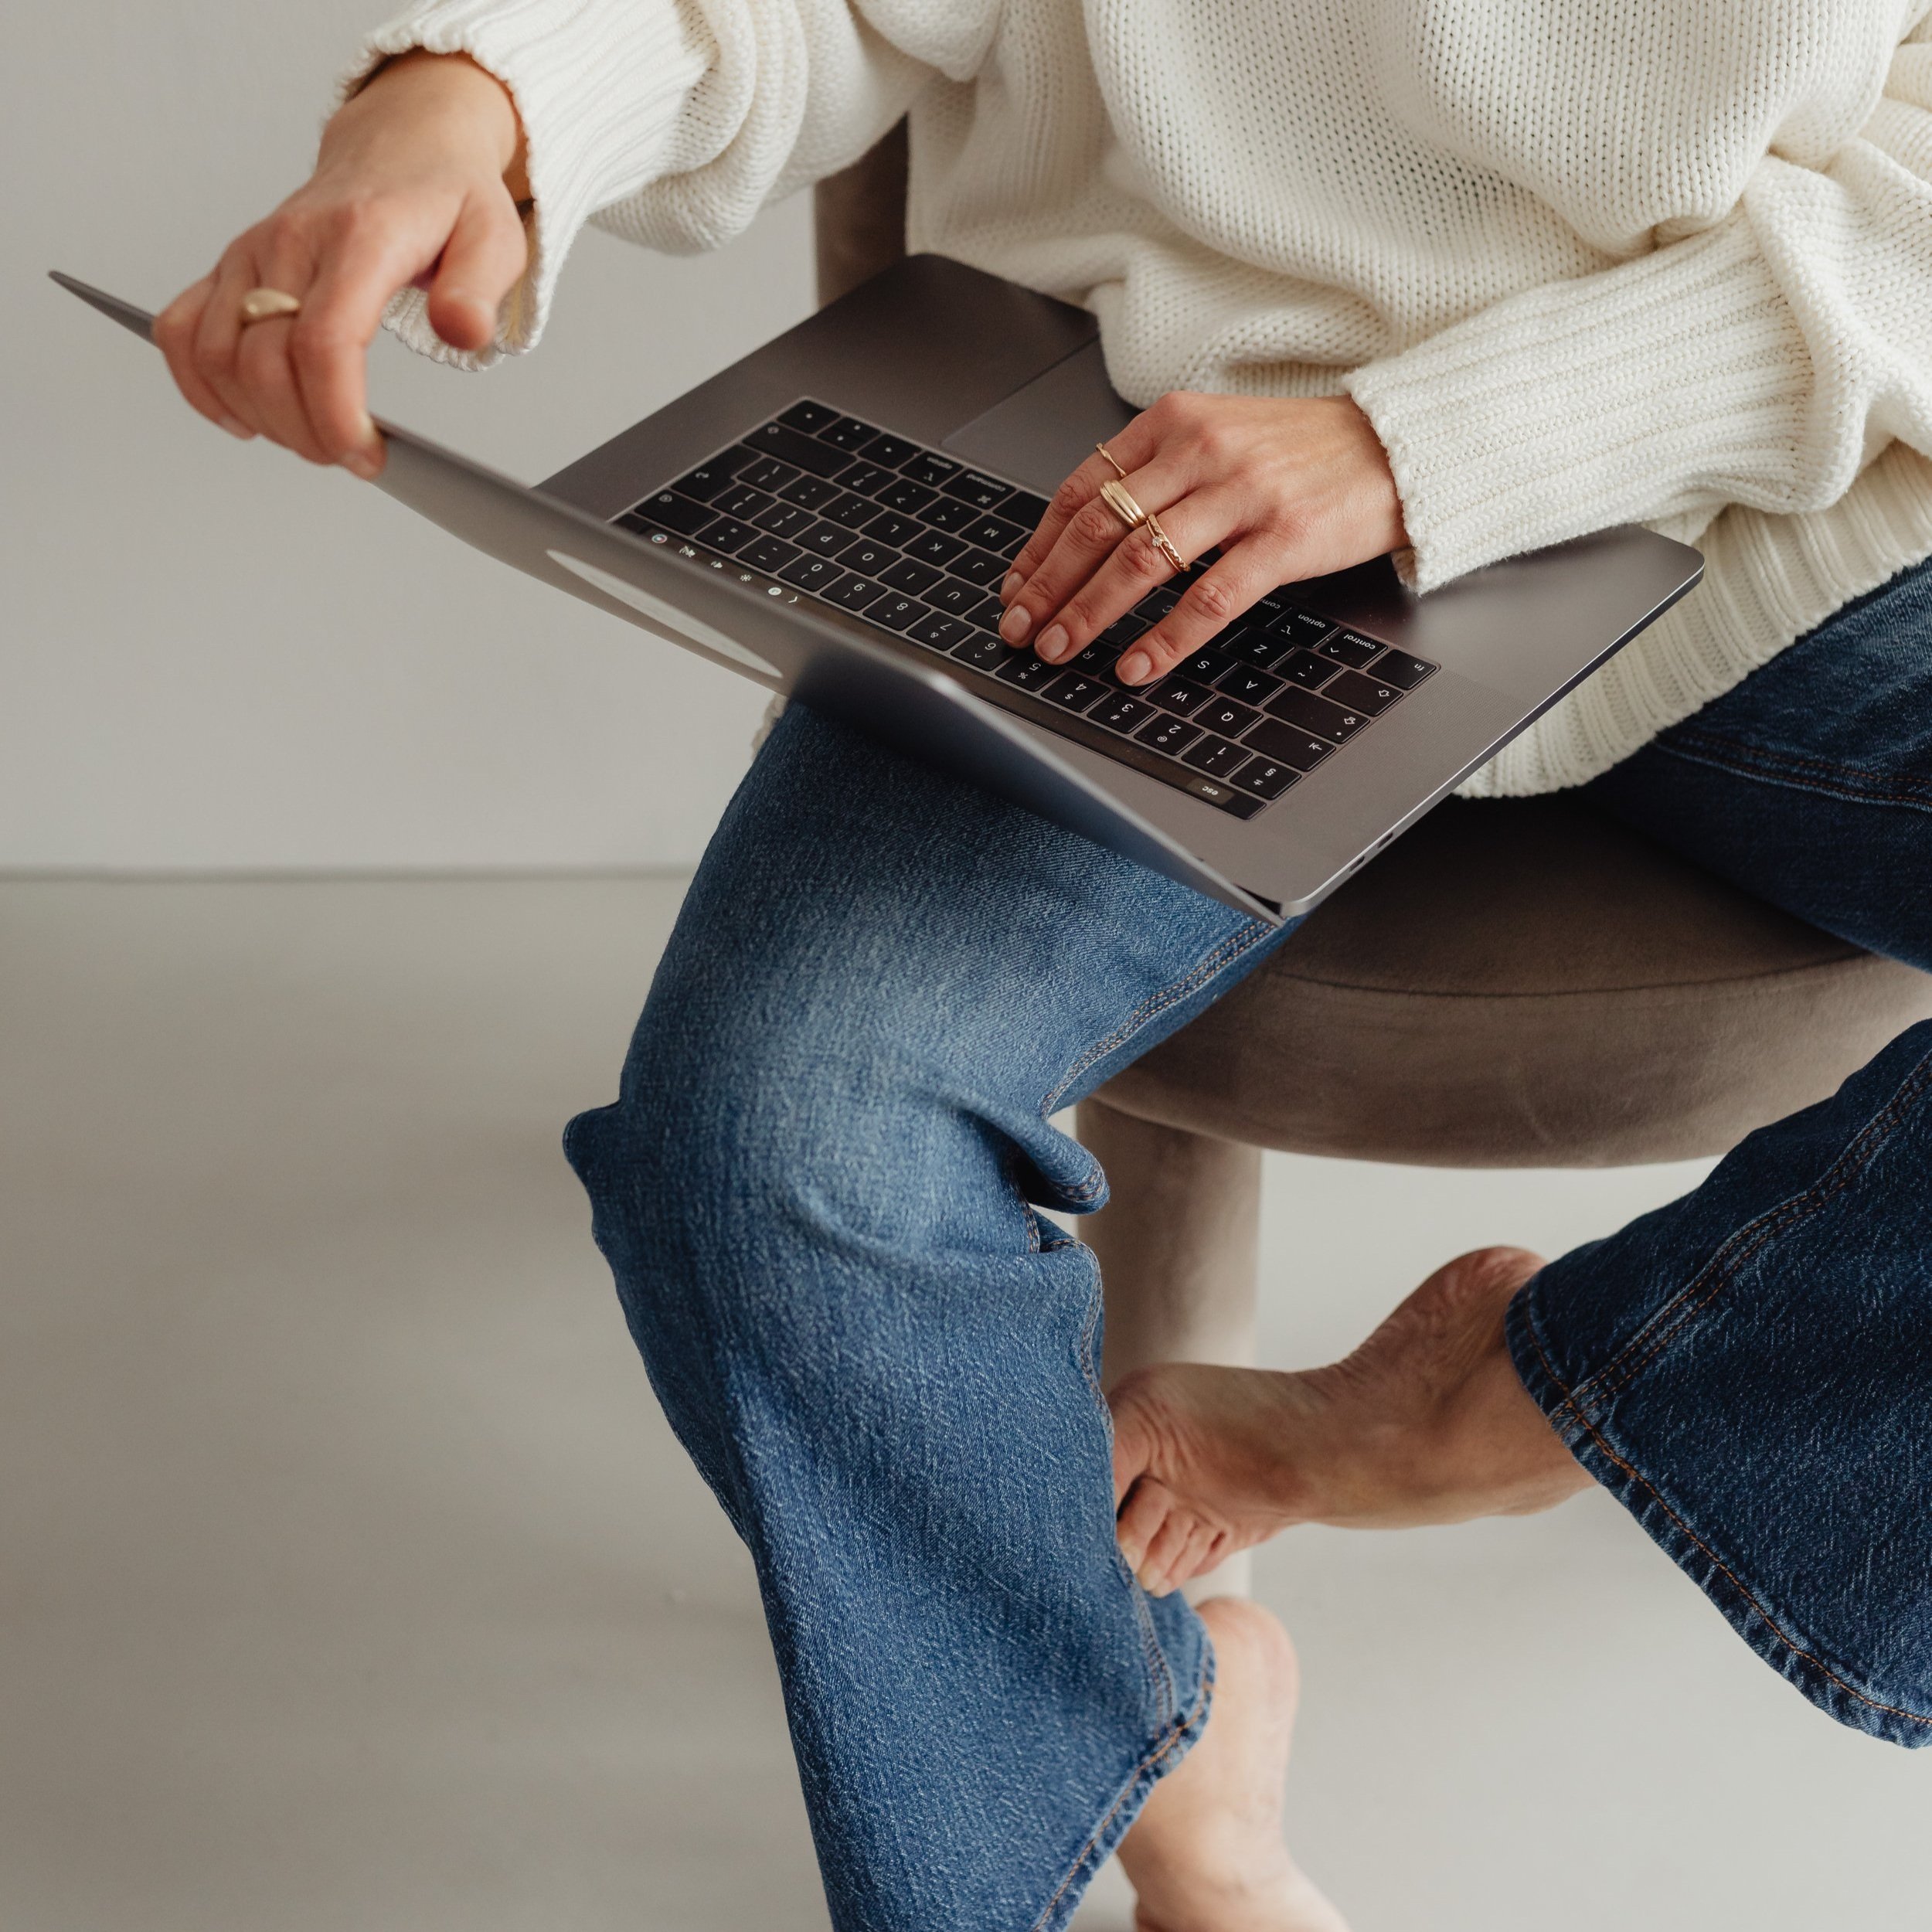 kaboompics_woman-in-white-sweater-gold-rings-jewelry-jeans-laptop-work-29450.jpg